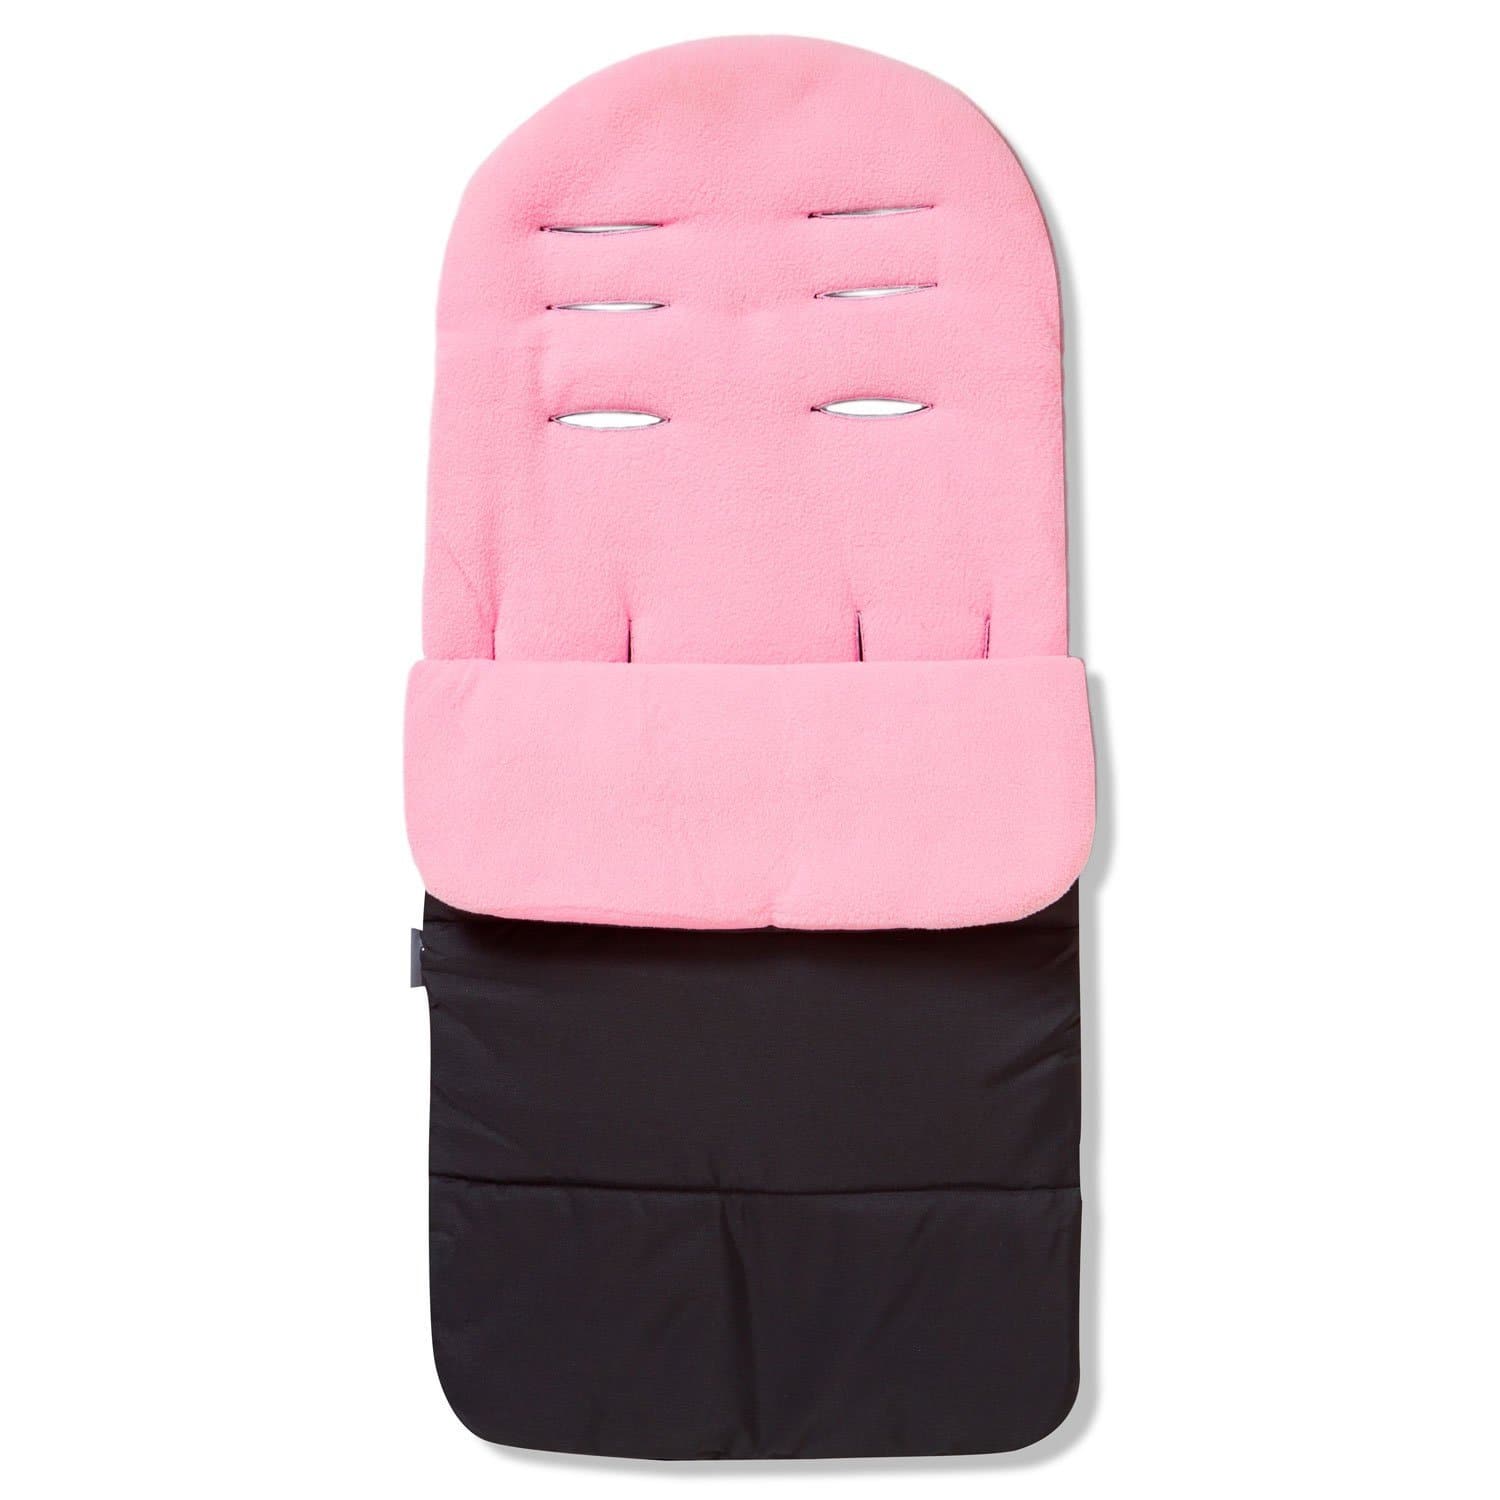 Premium Footmuff / Cosy Toes Compatible with Greentom - Candy Pink / Fits All Models | For Your Little One